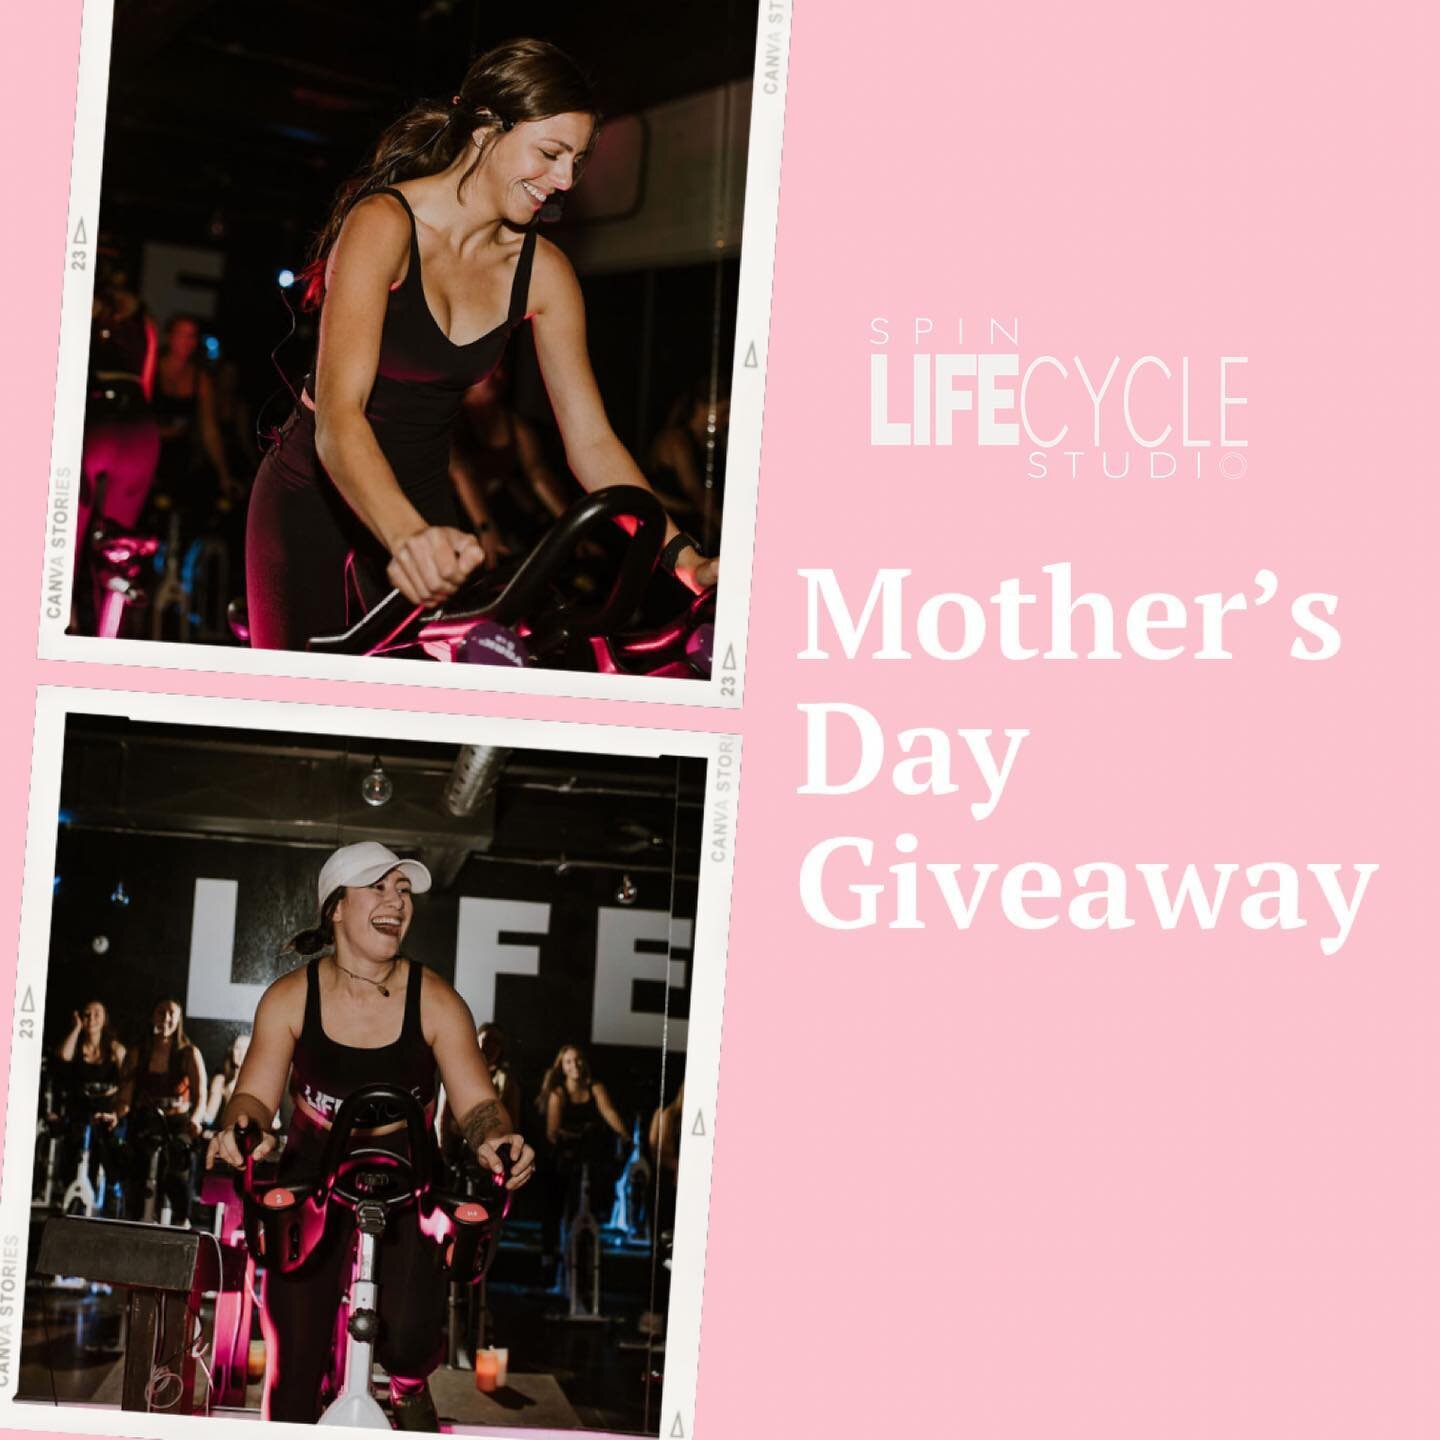 🌸Mother&rsquo;s Day Giveaway🌸
&ldquo;I&rsquo;m not like a regular mom, I&rsquo;m a cool mom😎&rdquo;

This is your reminder that Mother&rsquo;s Day is THIS SUNDAY, and to celebrate we thought we&rsquo;d do a little
🌸Mother&rsquo;s Day GIVEAWAY for